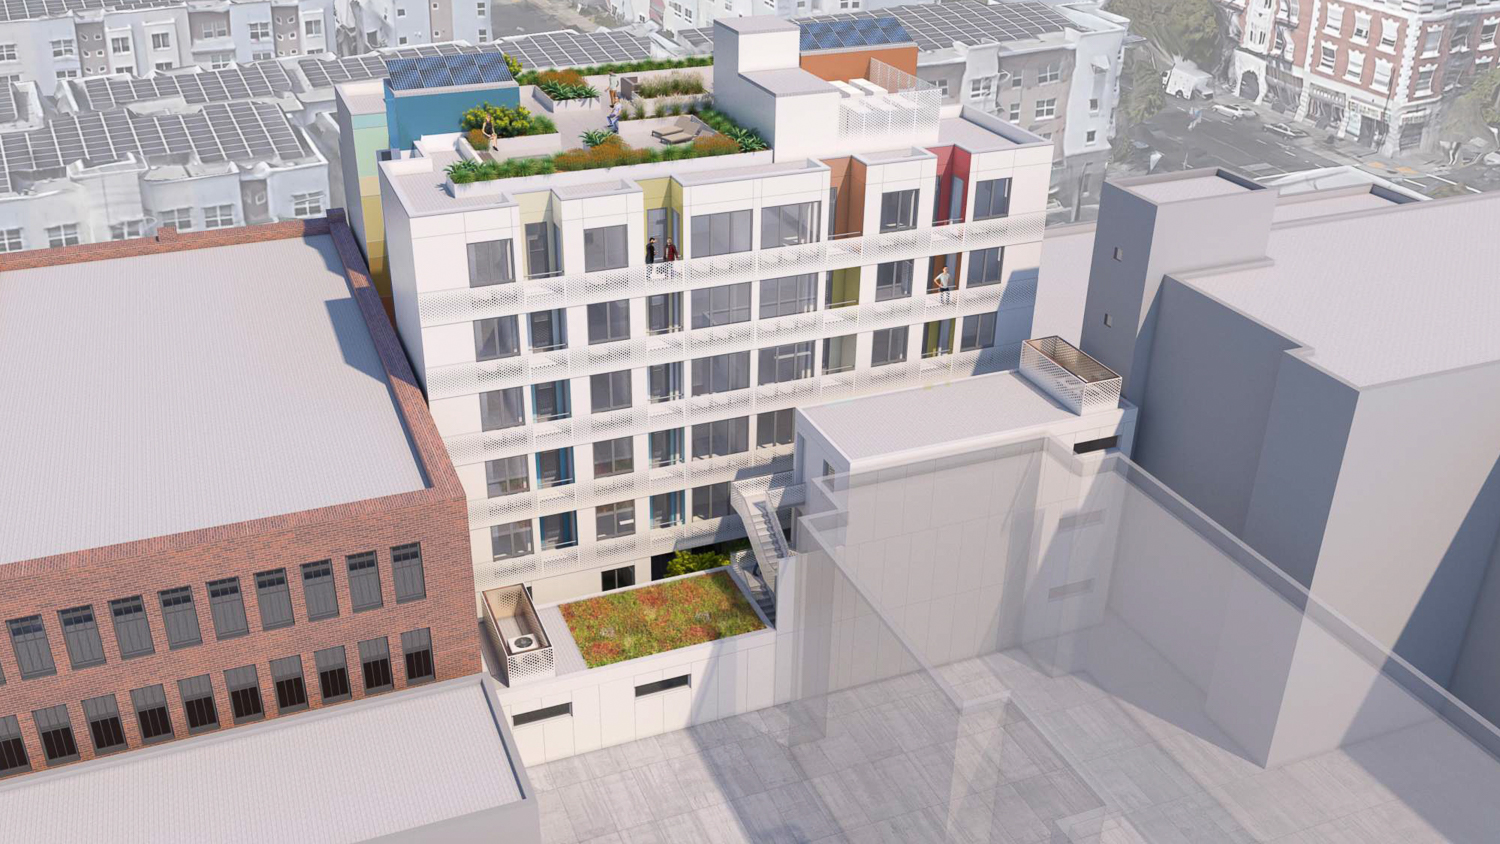 1721 15th Street aerial view of the rear side, rendering by Lowney Architecture